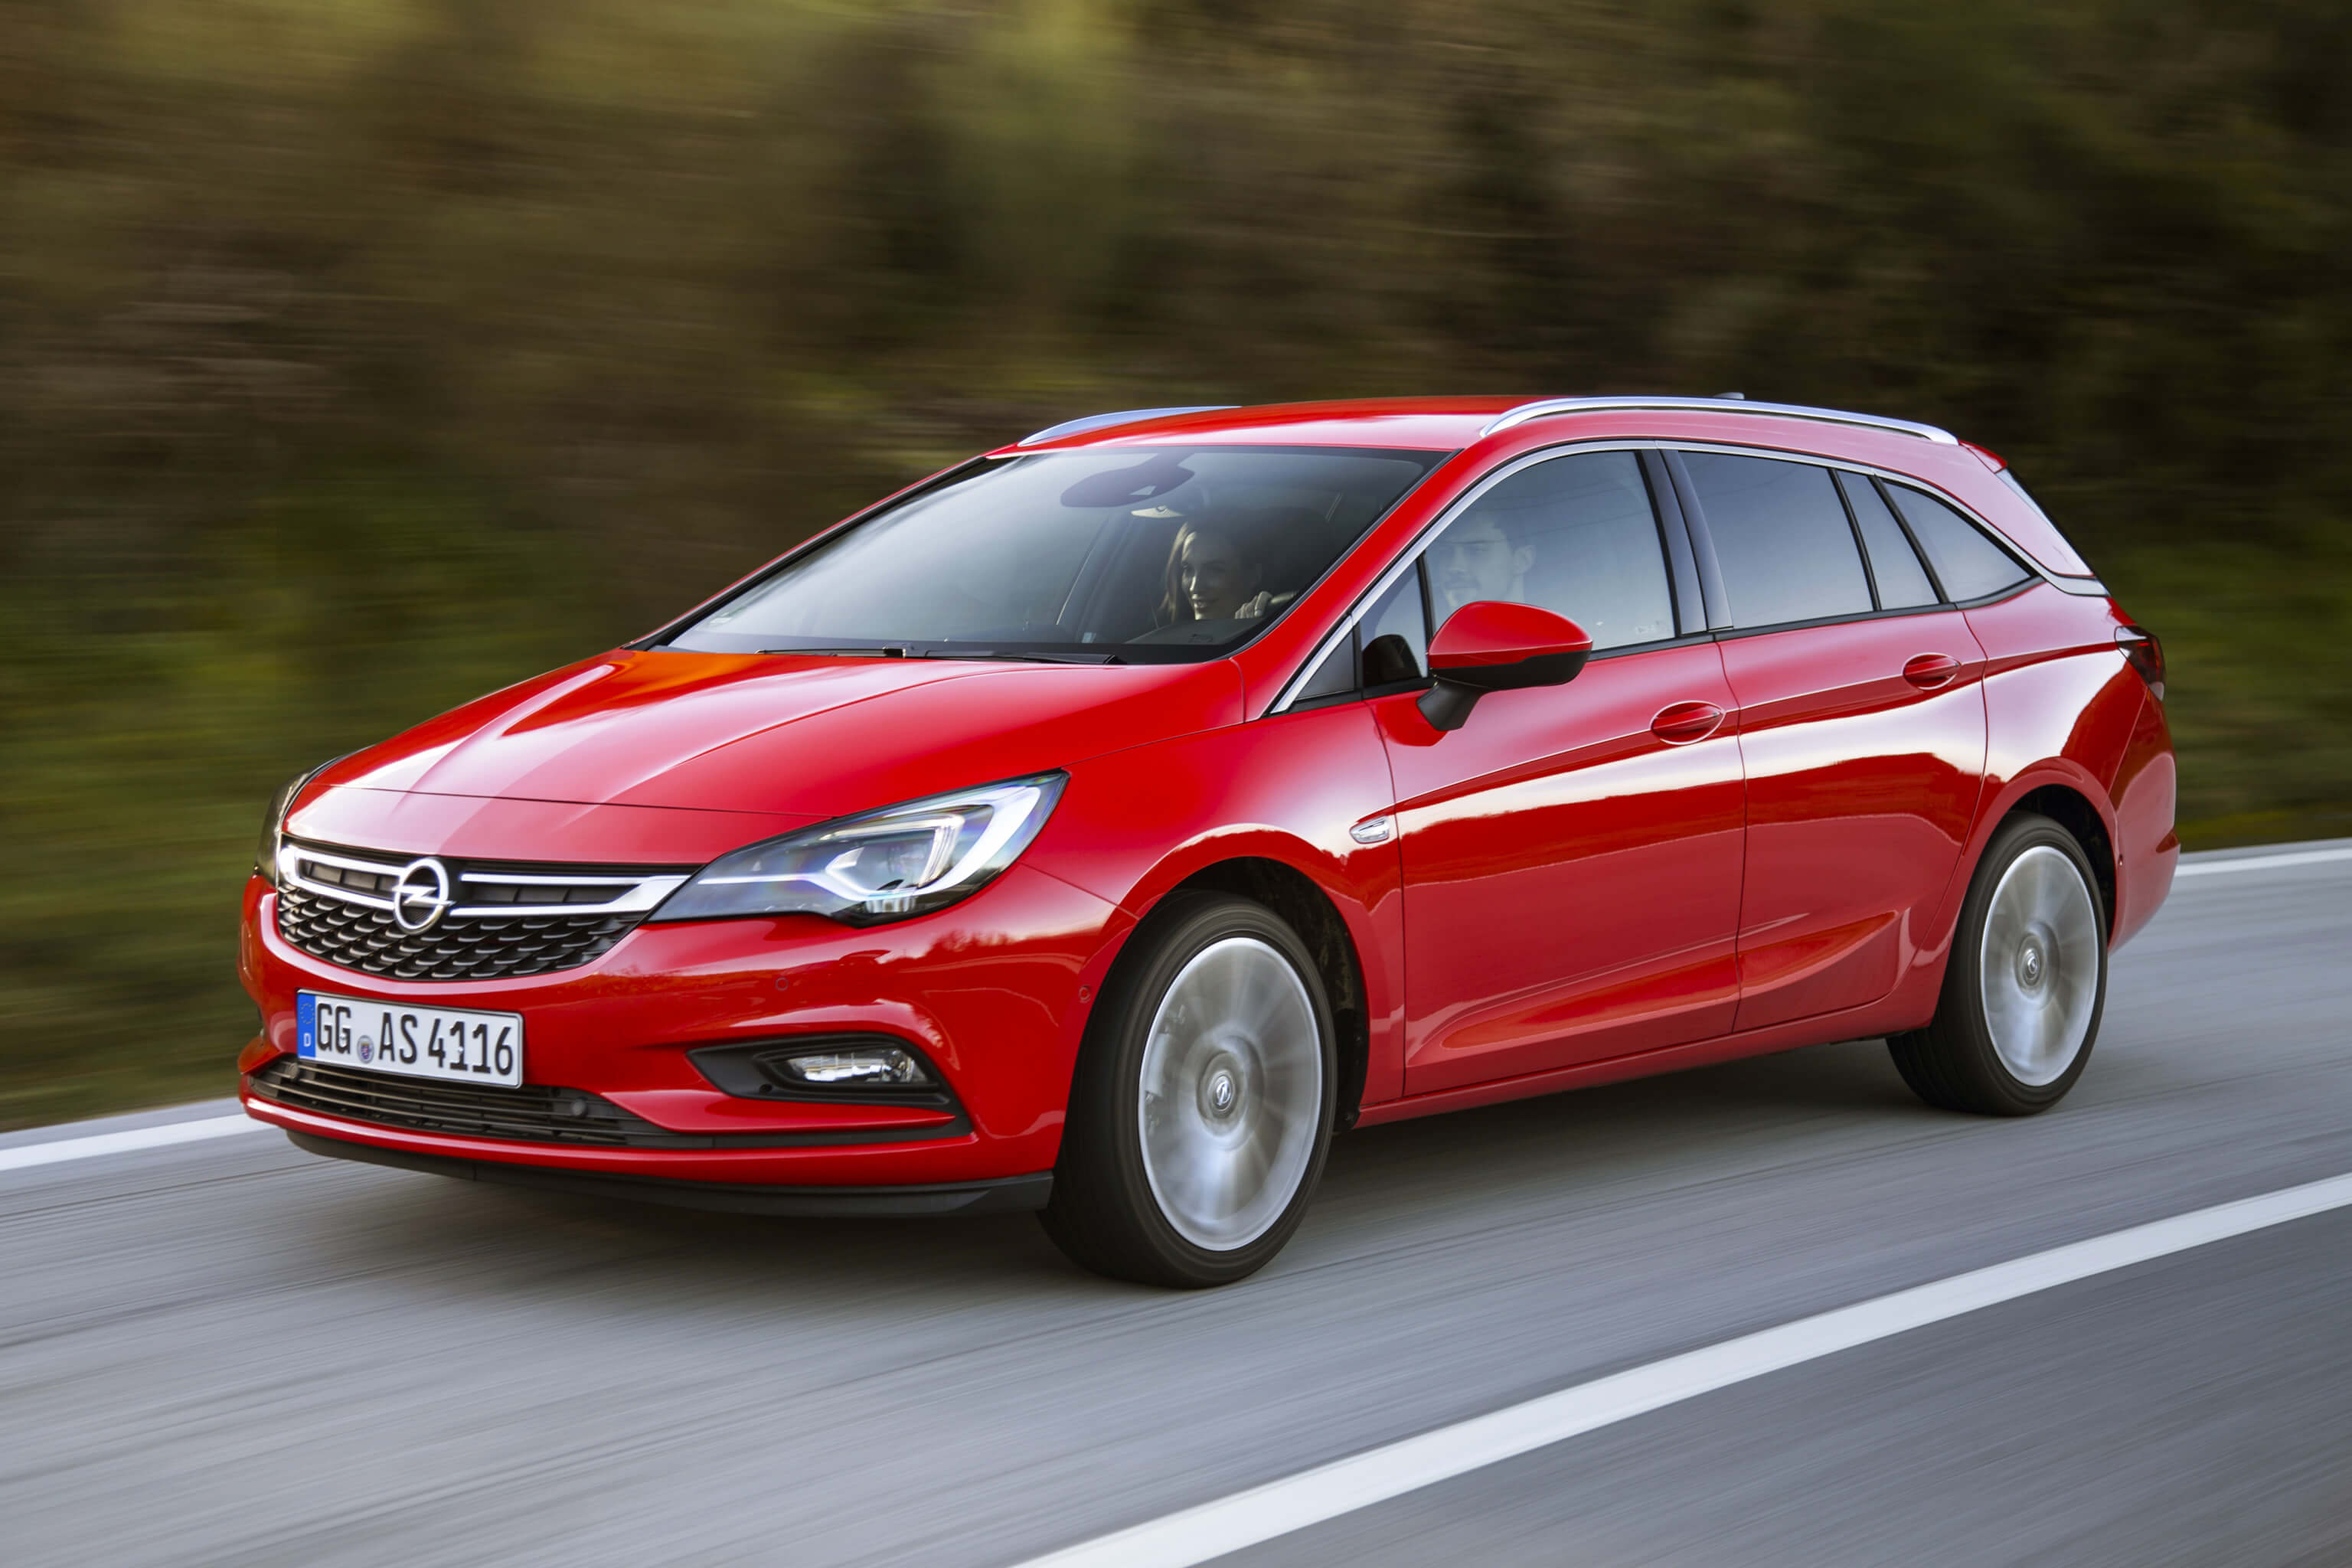 Opel Astra Sports Tourer, Leasing offer, Affordable monthly rate, Practical and stylish, 3080x2050 HD Desktop